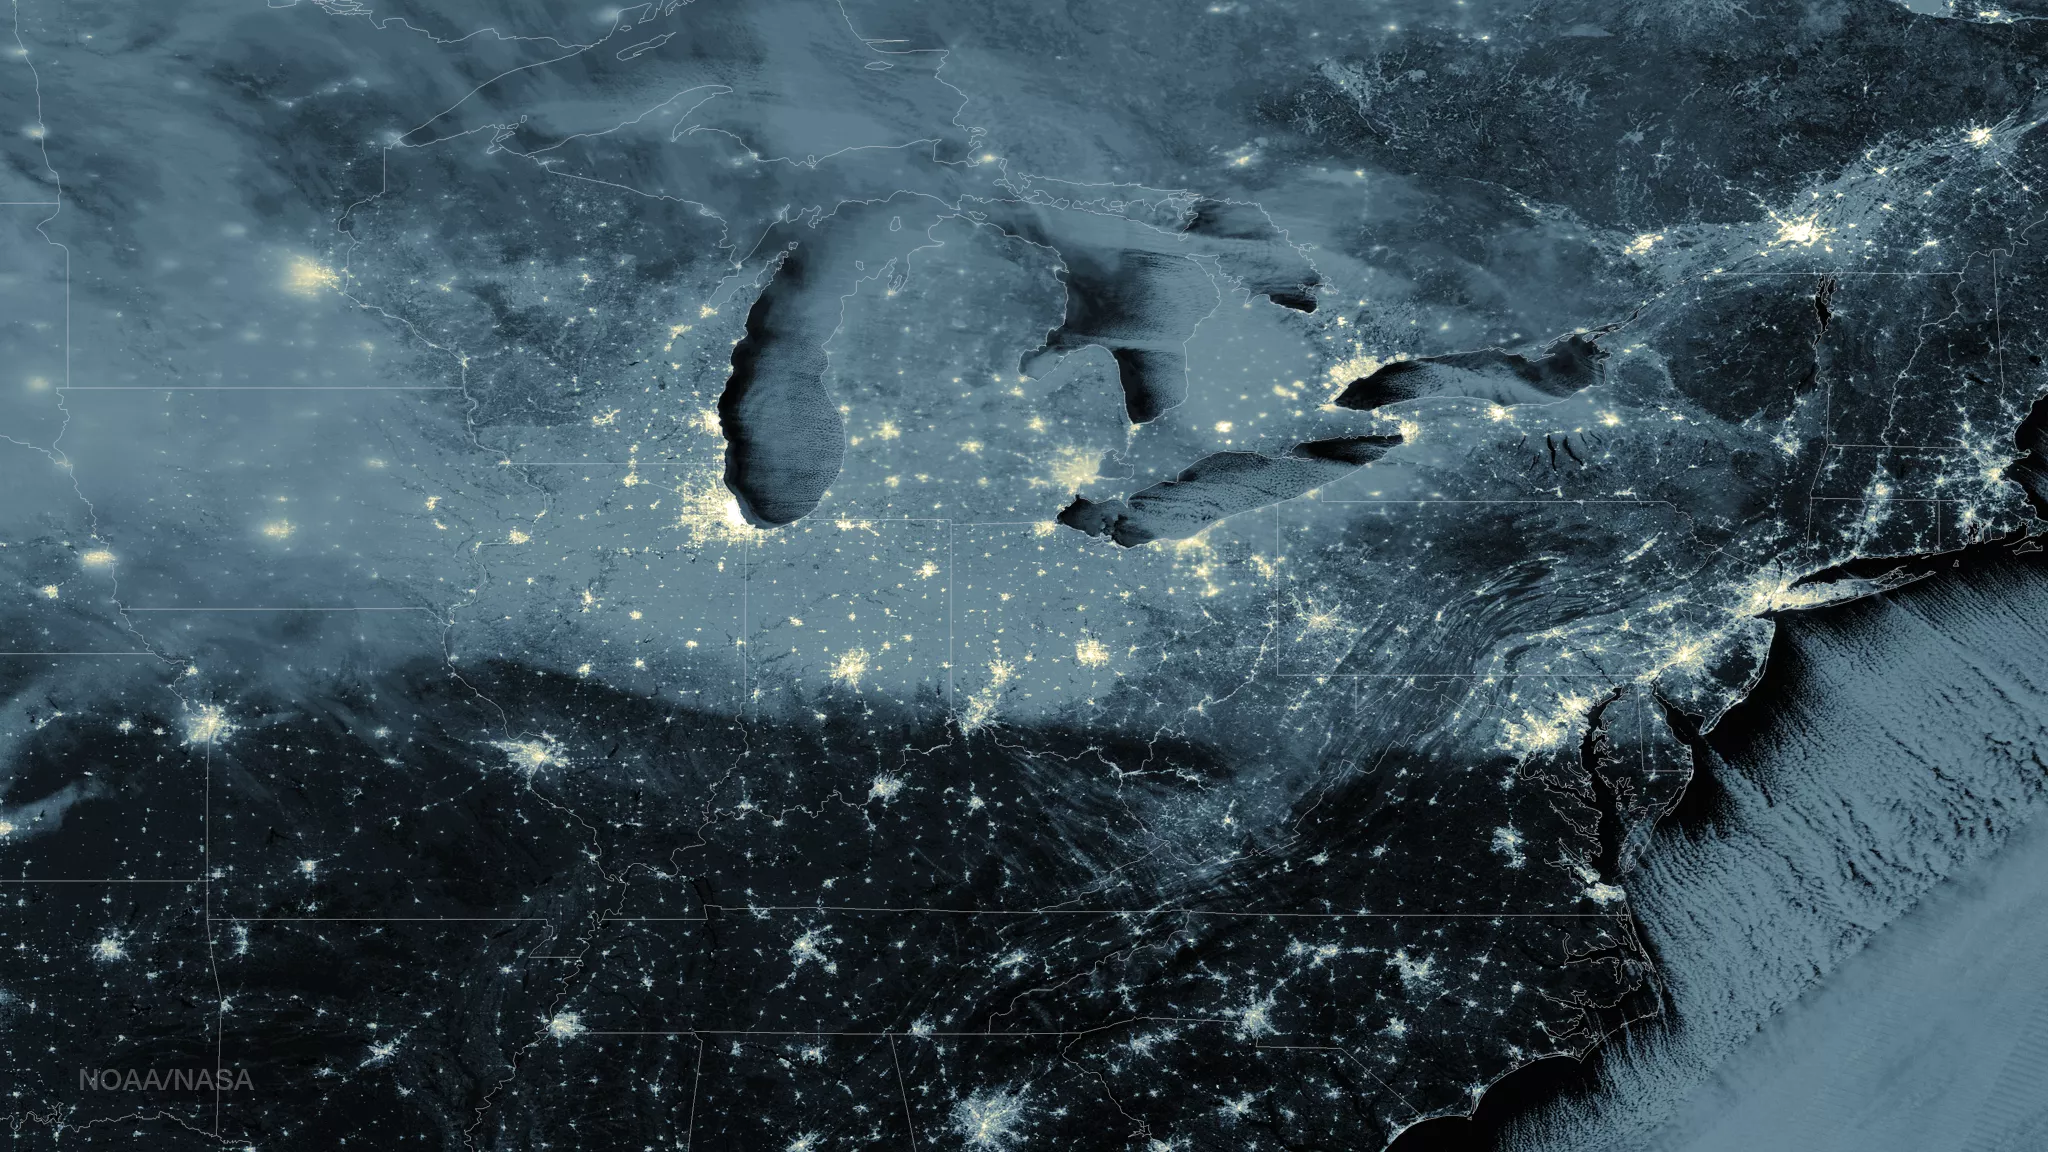 Night time imagery of the atlantic coast